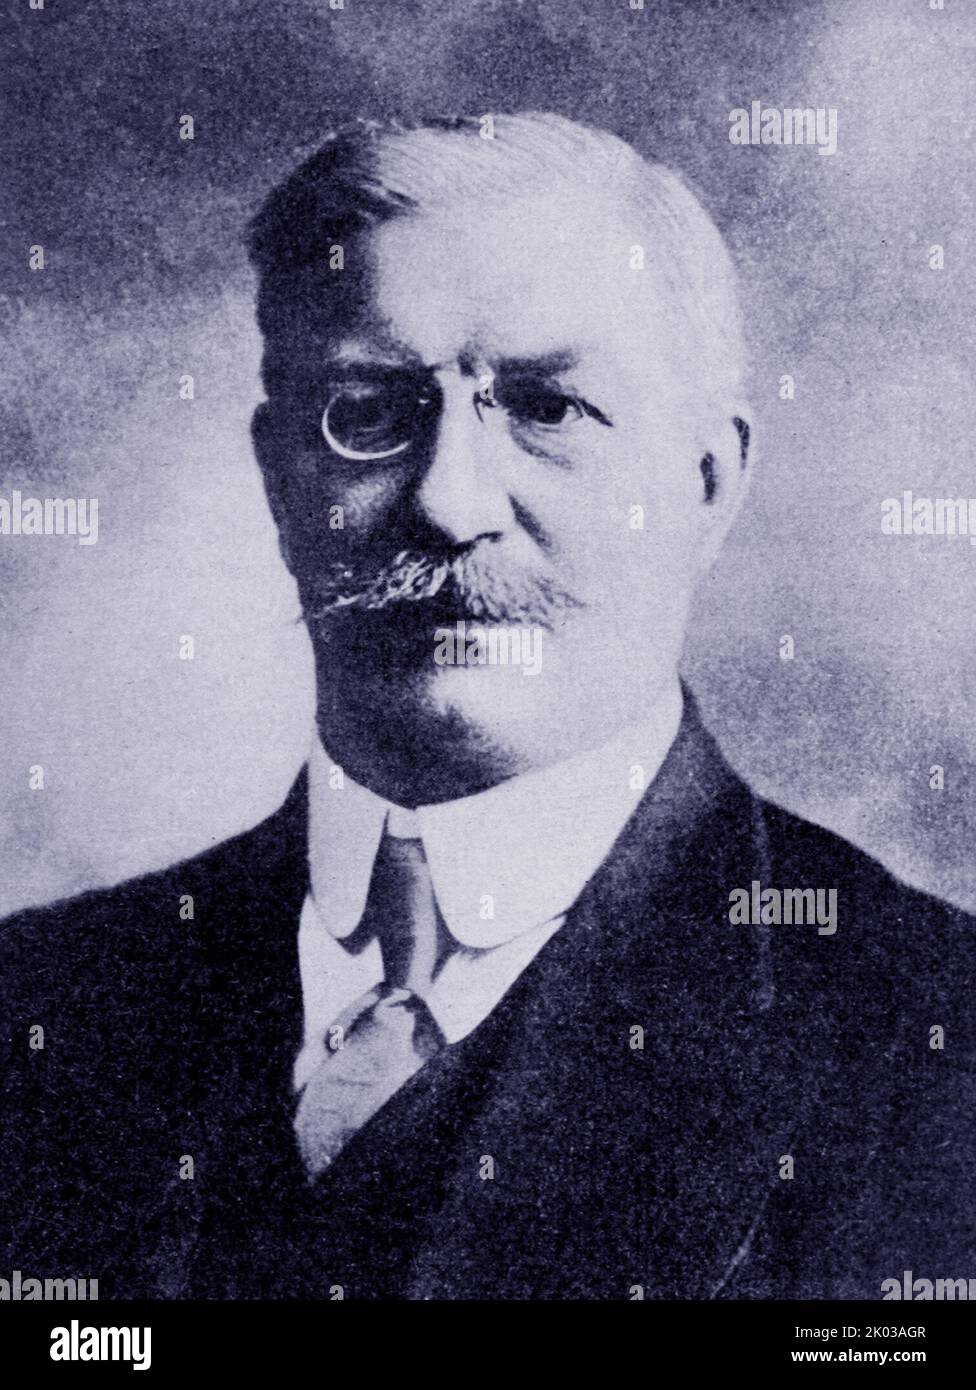 Pavel Milyukov (1859 - 1943) Russian historian and liberal politician. Milyukov was the founder, leader, and the most prominent member of the Constitutional Democratic party (known as the Kadets). In the Russian Provisional Government, he served as Foreign Minister, working to prevent Russia's exit from the First World War. Stock Photo